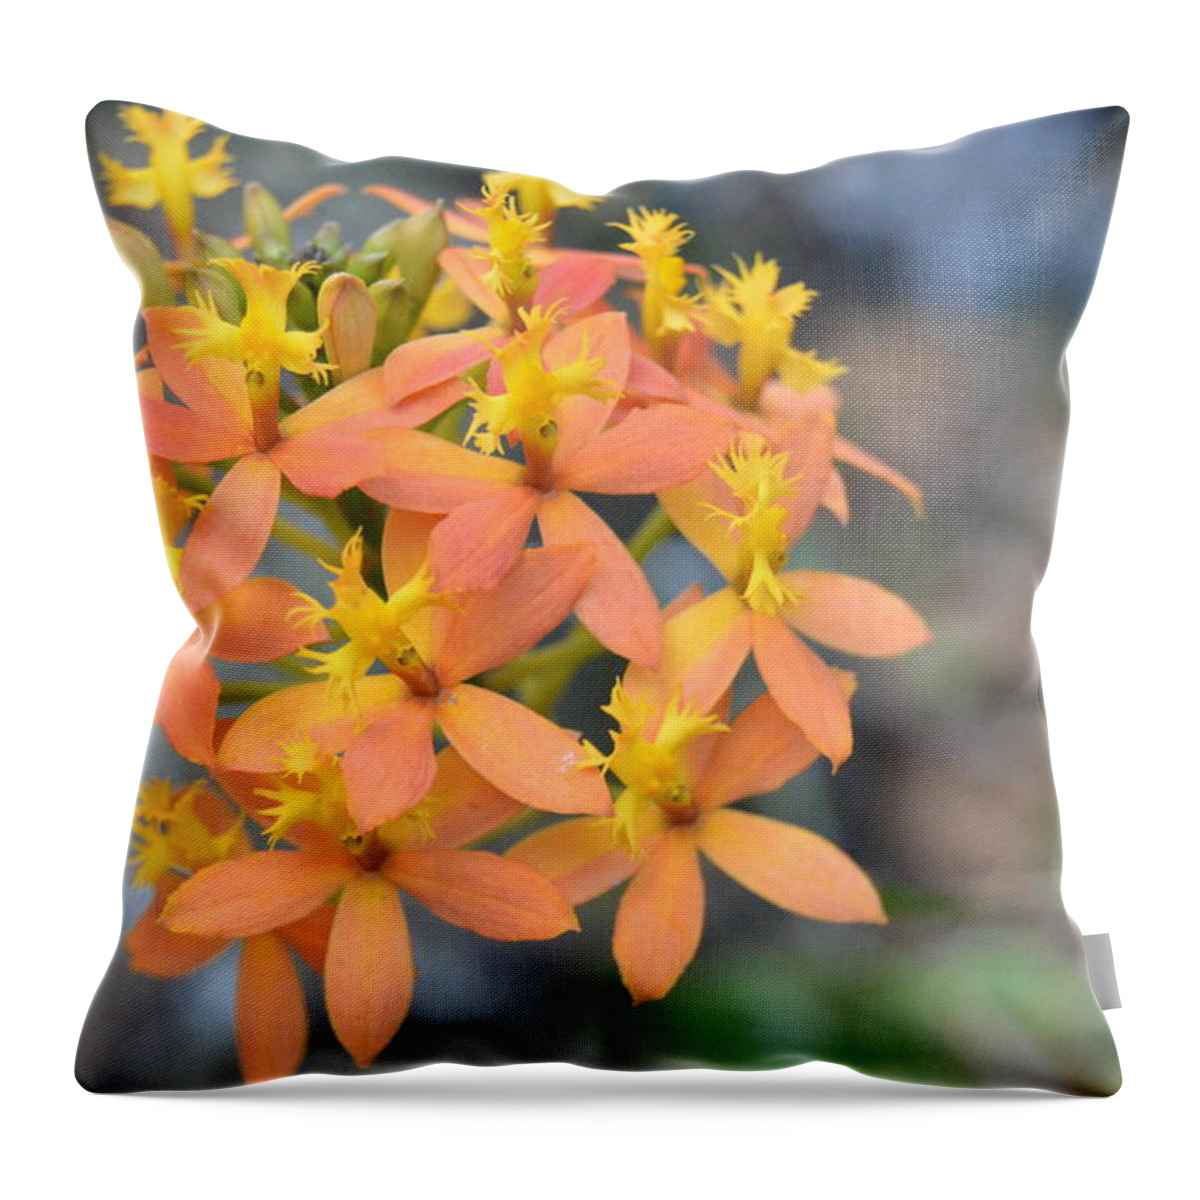 Kauai Throw Pillow featuring the photograph Orange Yellow Flowers by Amy Fose